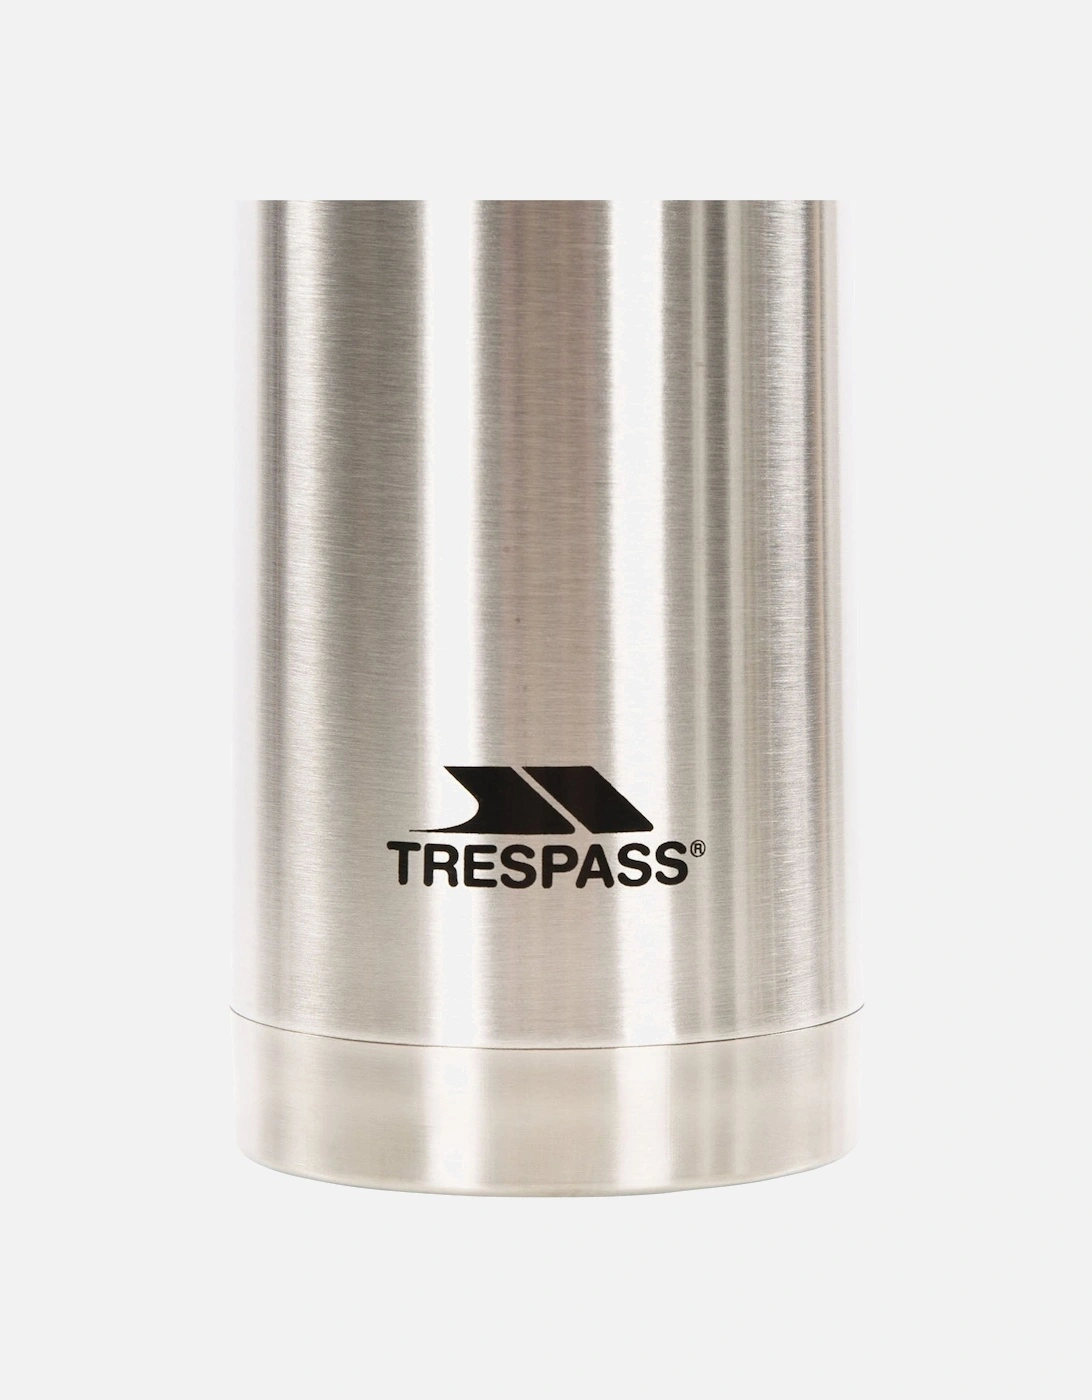 Thirst 100 Stainless Steel Travel Flask - 1L